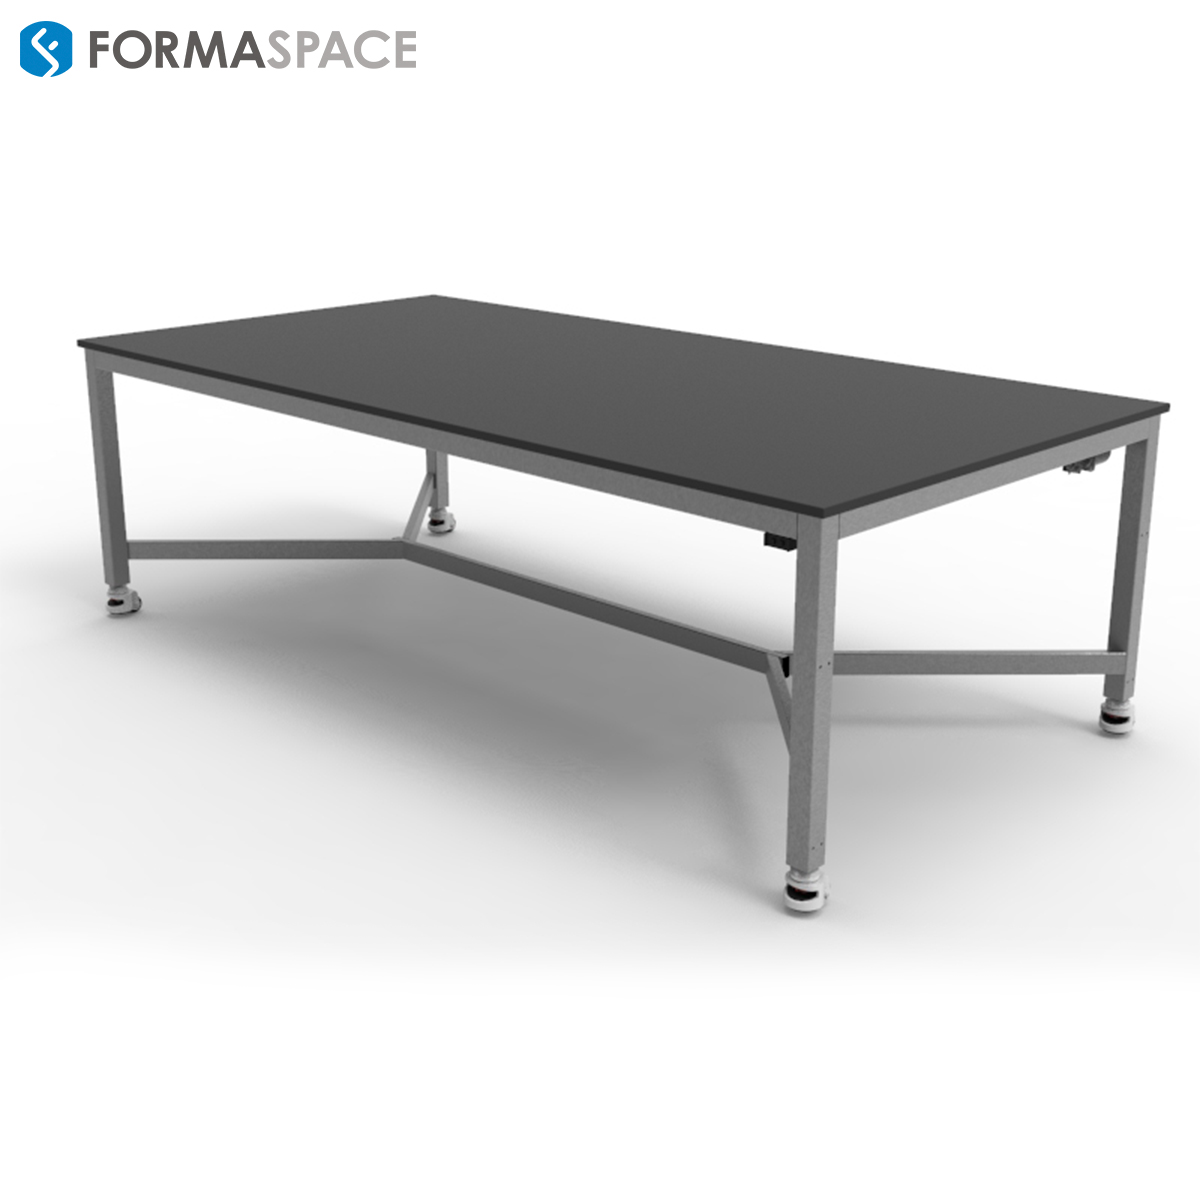 heavy duty work table in grey with center stretcher